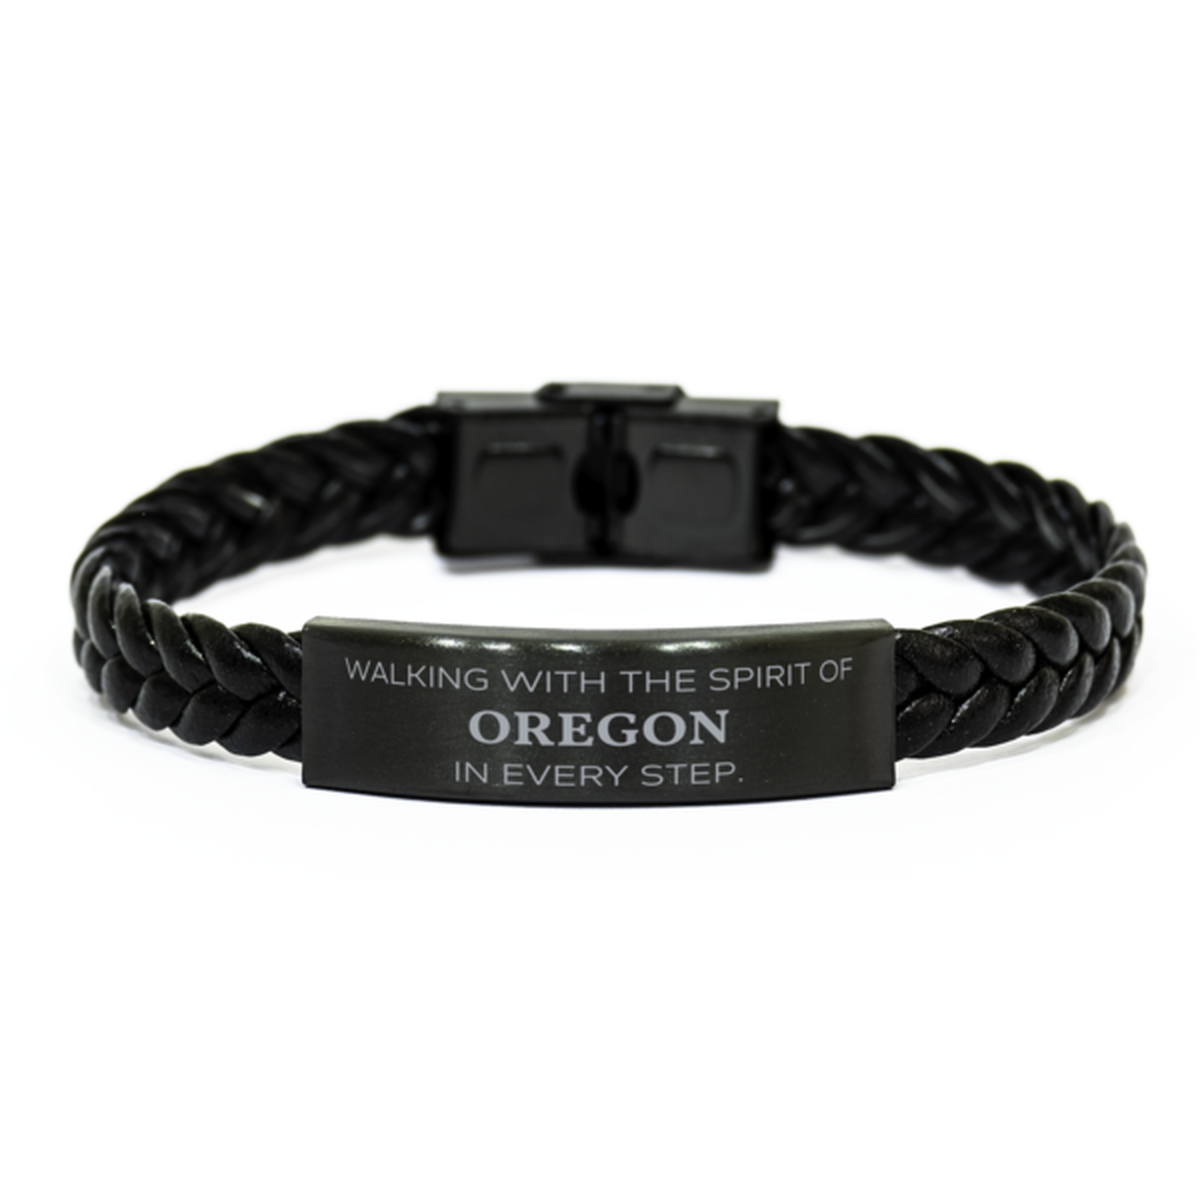 Oregon Gifts, Walking with the spirit, Love Oregon Birthday Christmas Braided Leather Bracelet For Oregon People, Men, Women, Friends